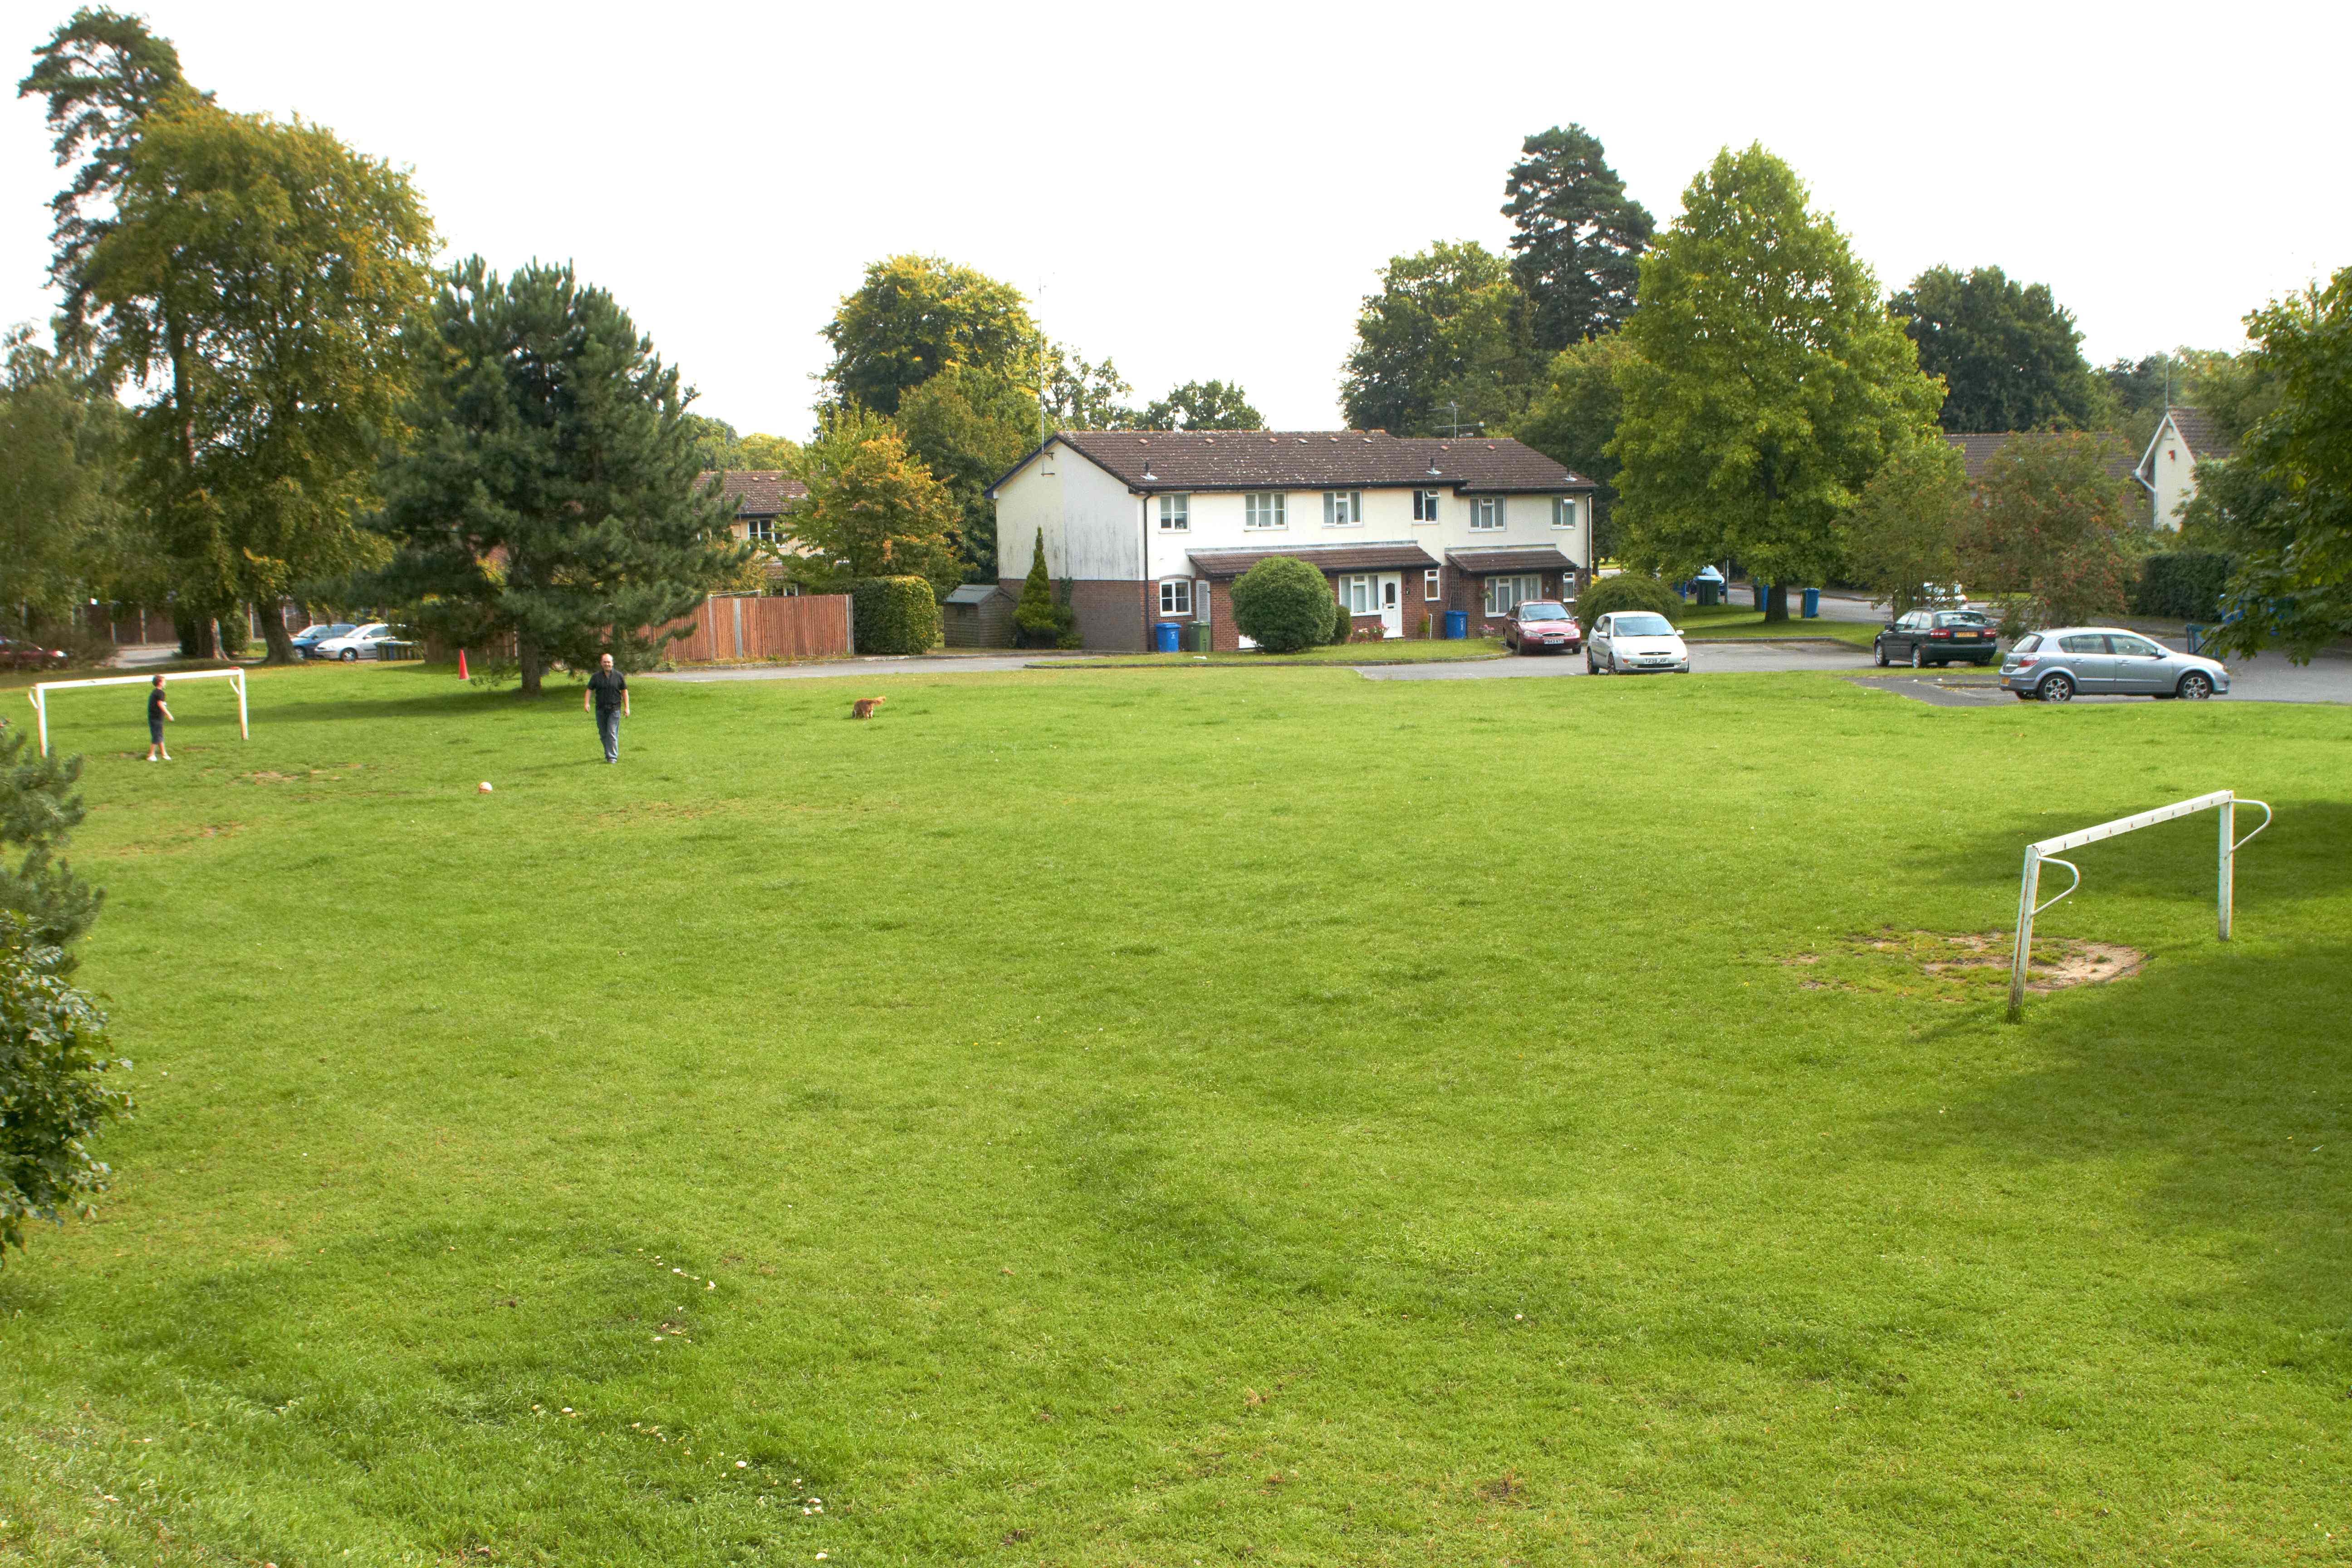 Kingfisher Close 5-a-side pitch